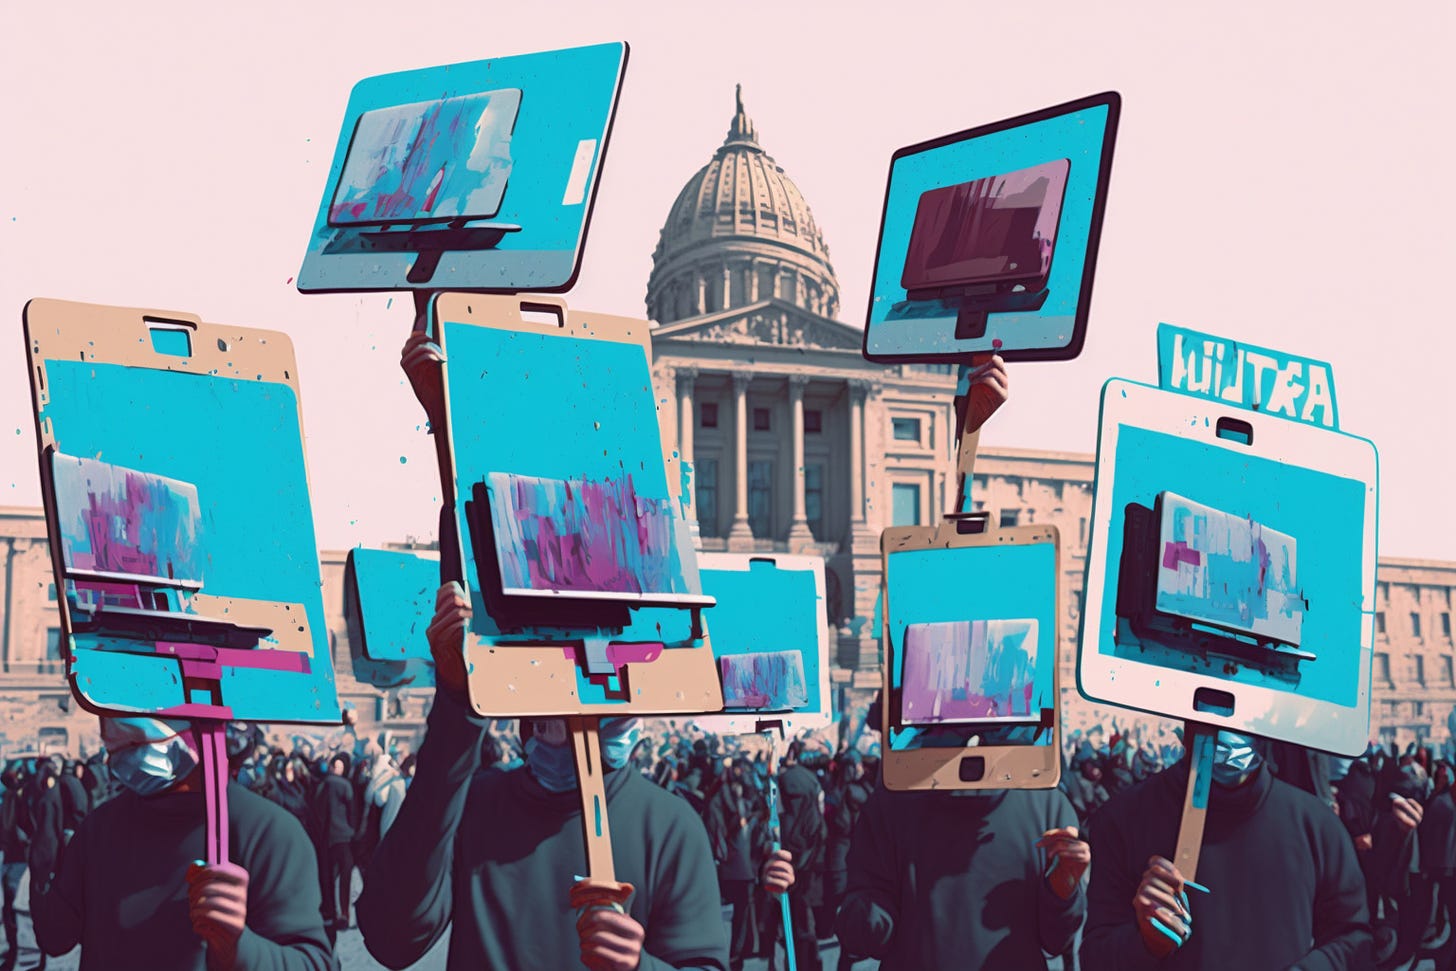 Midjourney-generated art (sorry) of artists protesting in front of a capitol, lifting up canvases merged with tablets and art covering the artists' faces